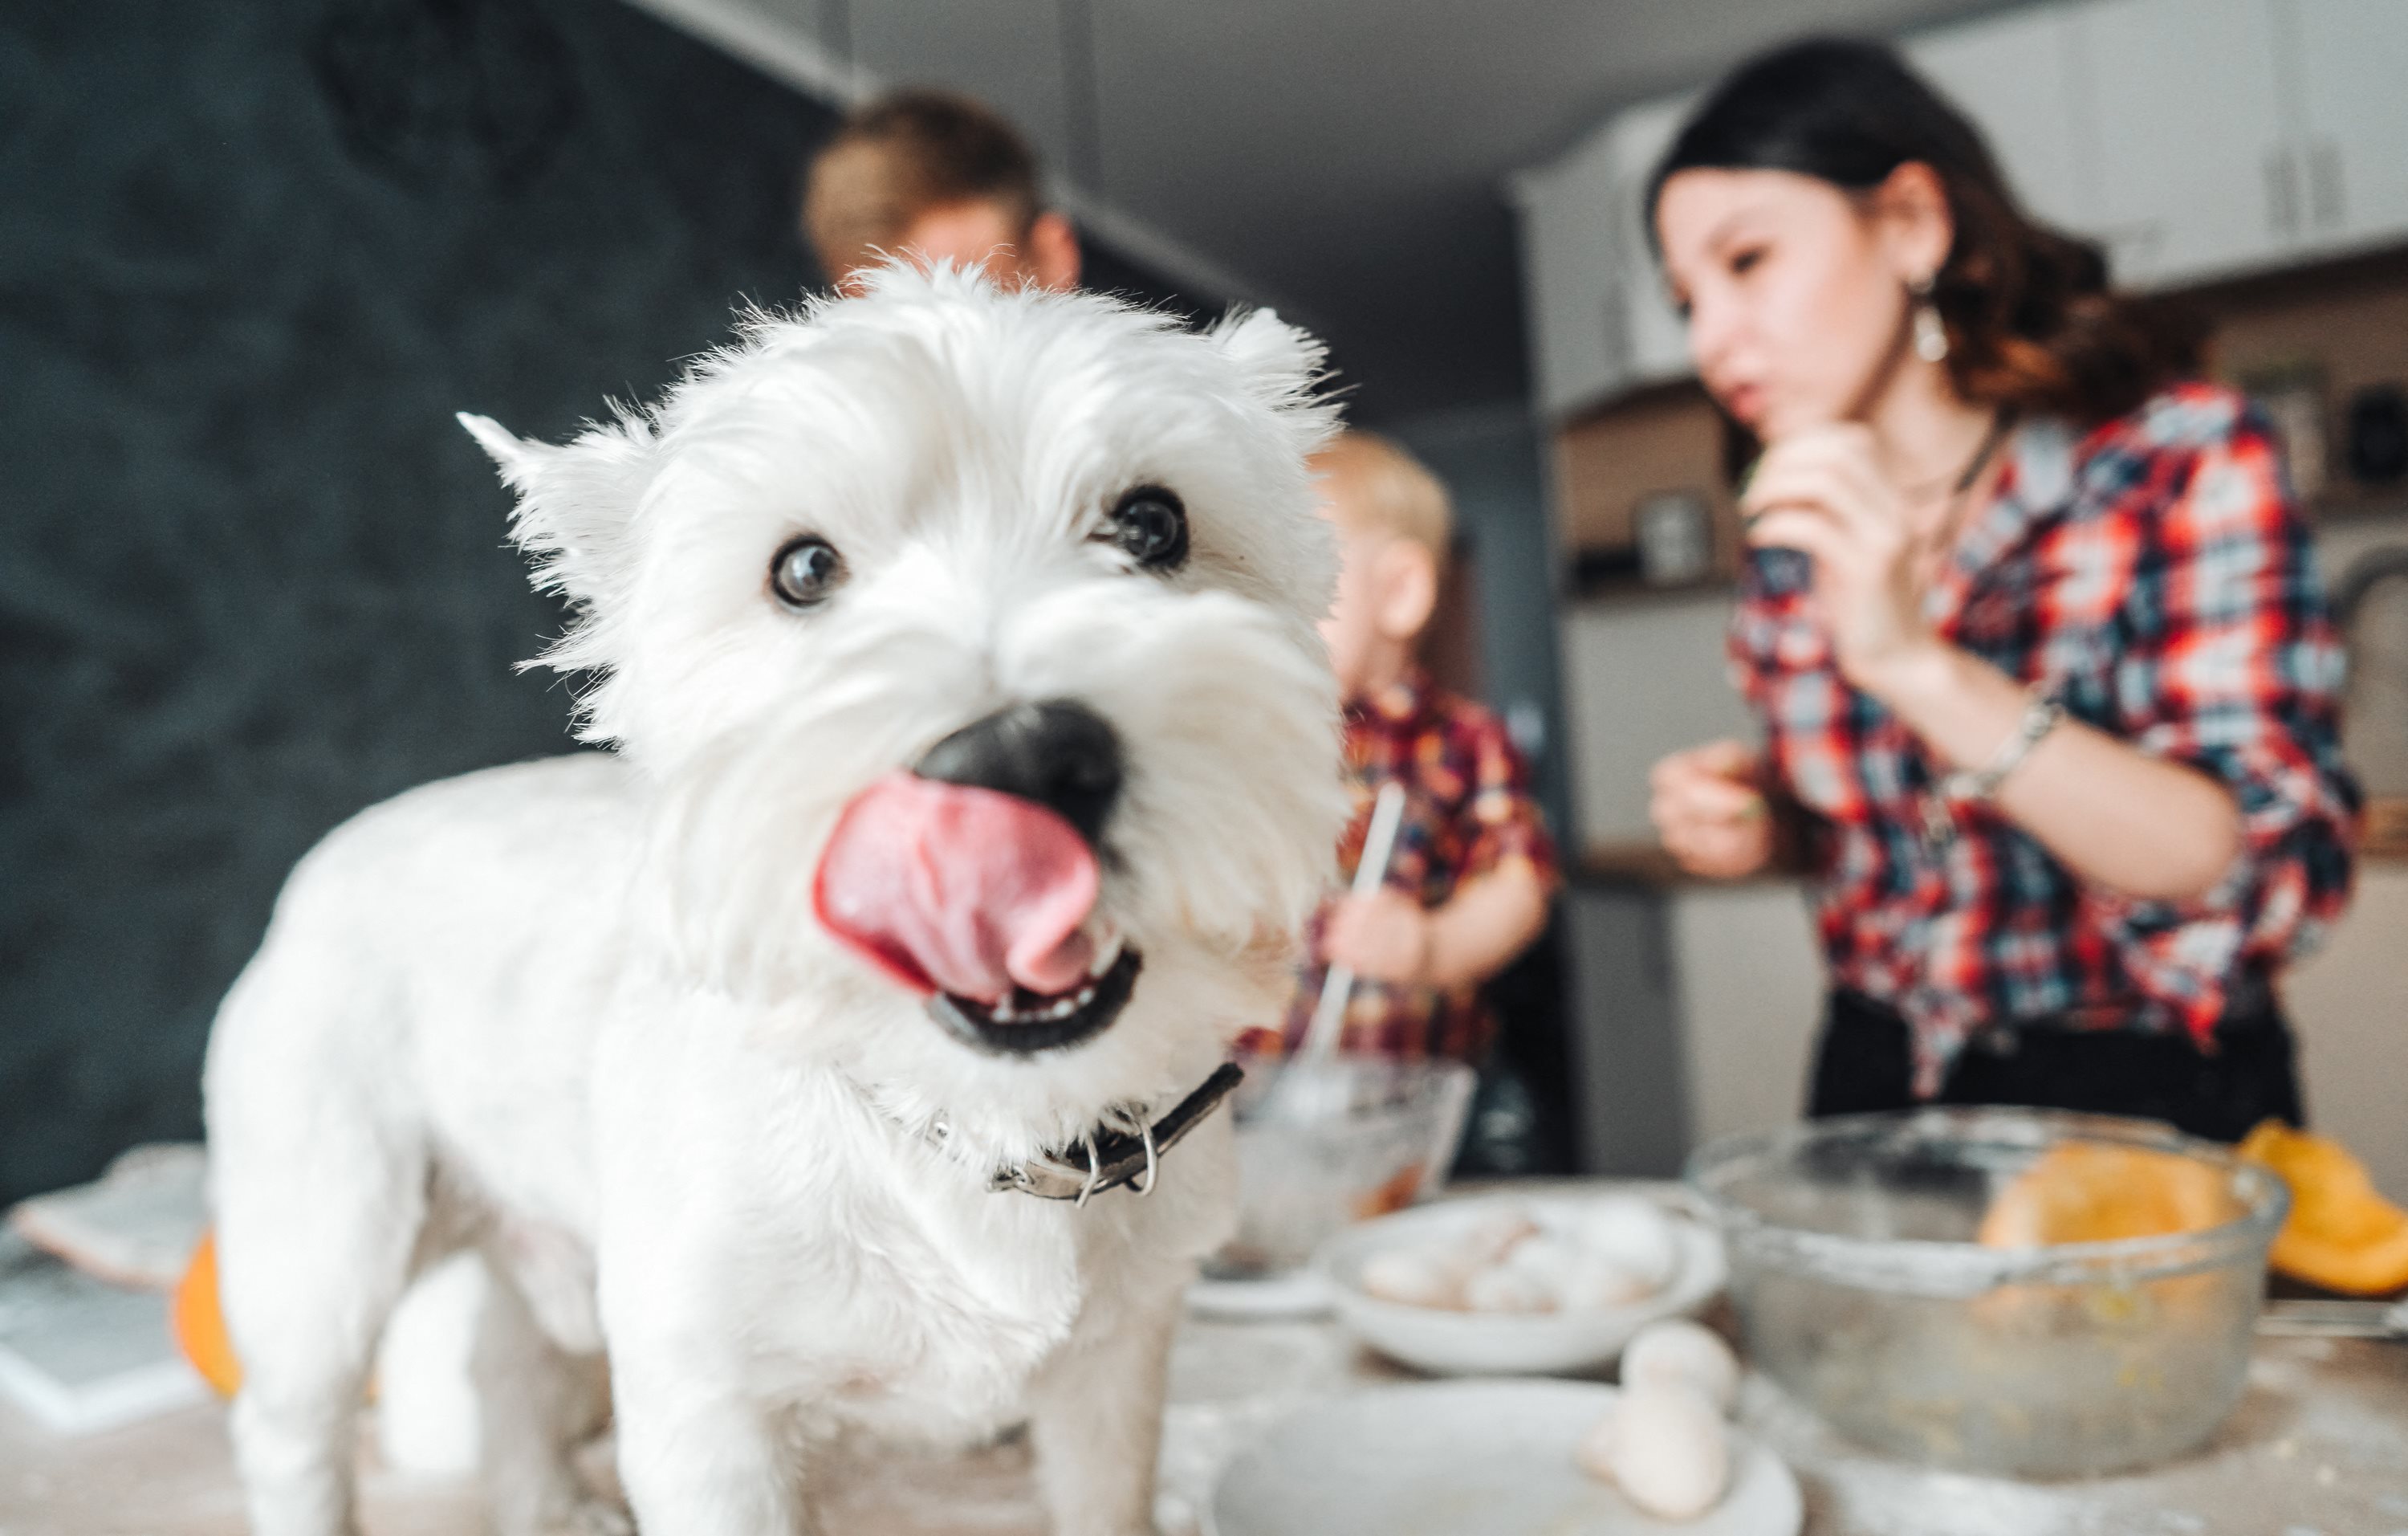 Couple cooking in kitchen with dog